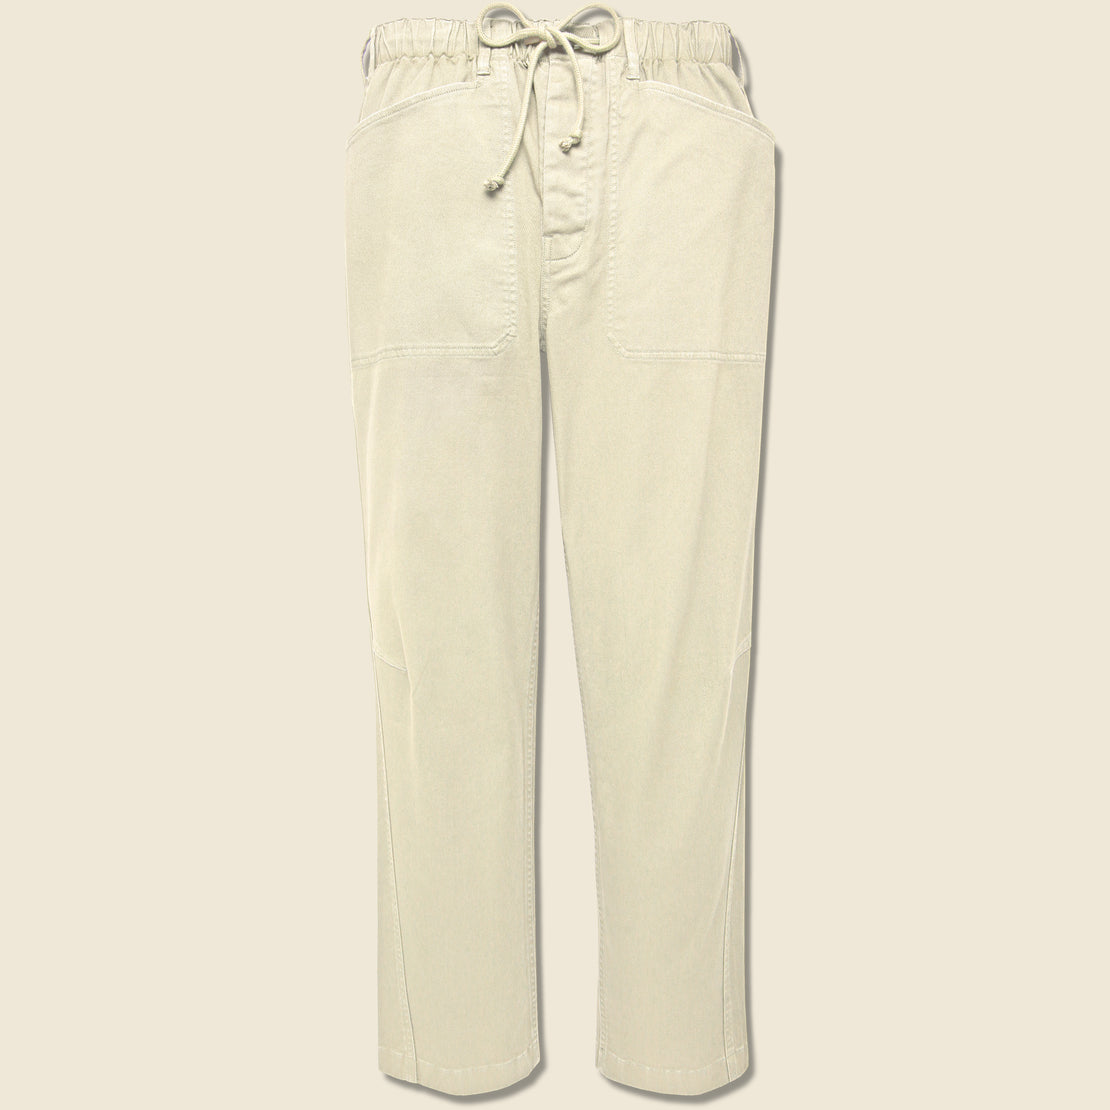 Pull On Button Fly Pants - Oat Milk